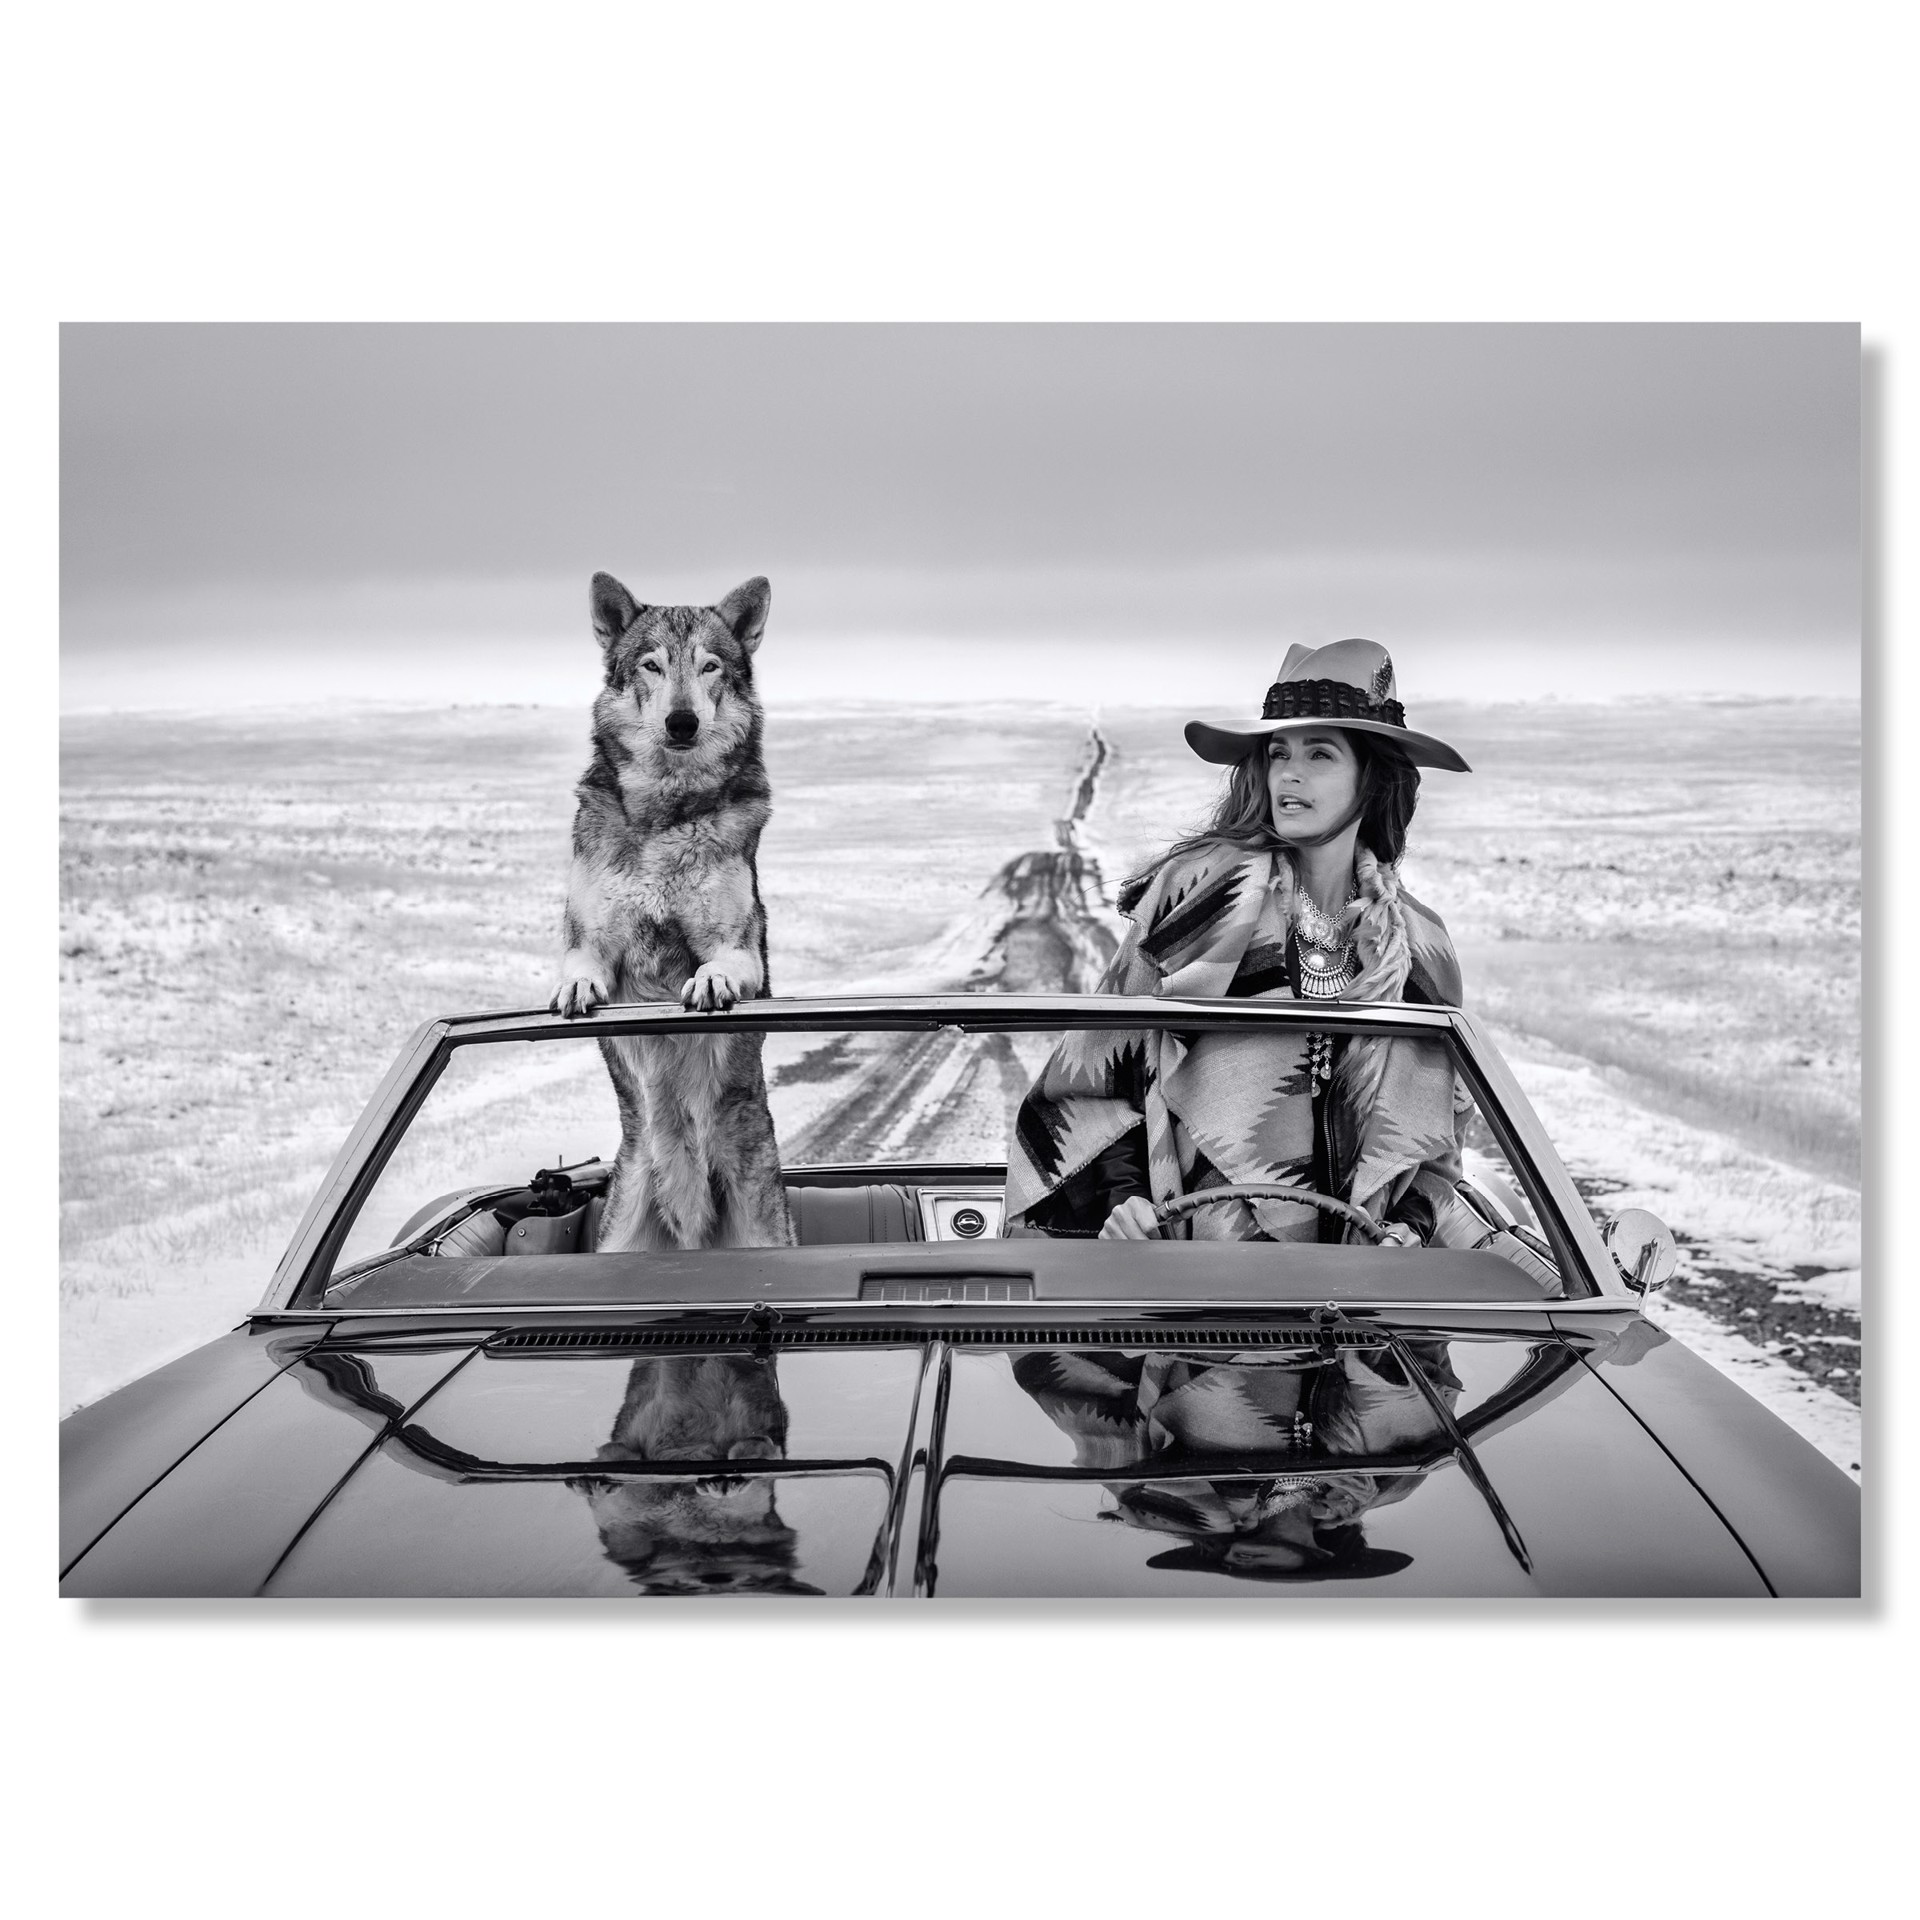 On the Road Again (19/20) by David Yarrow